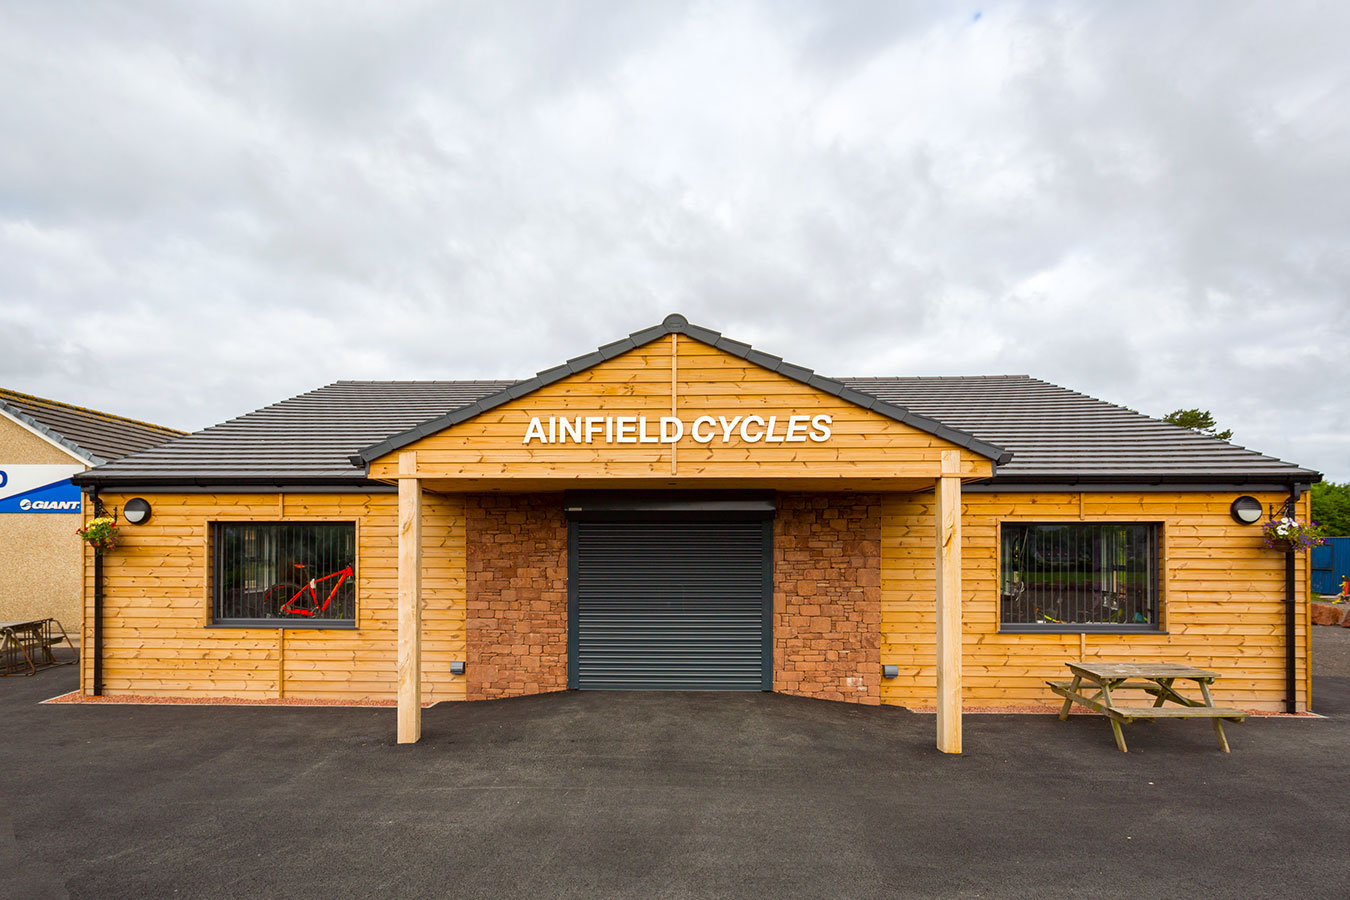 Anfield Cycles William King Commercial Construction